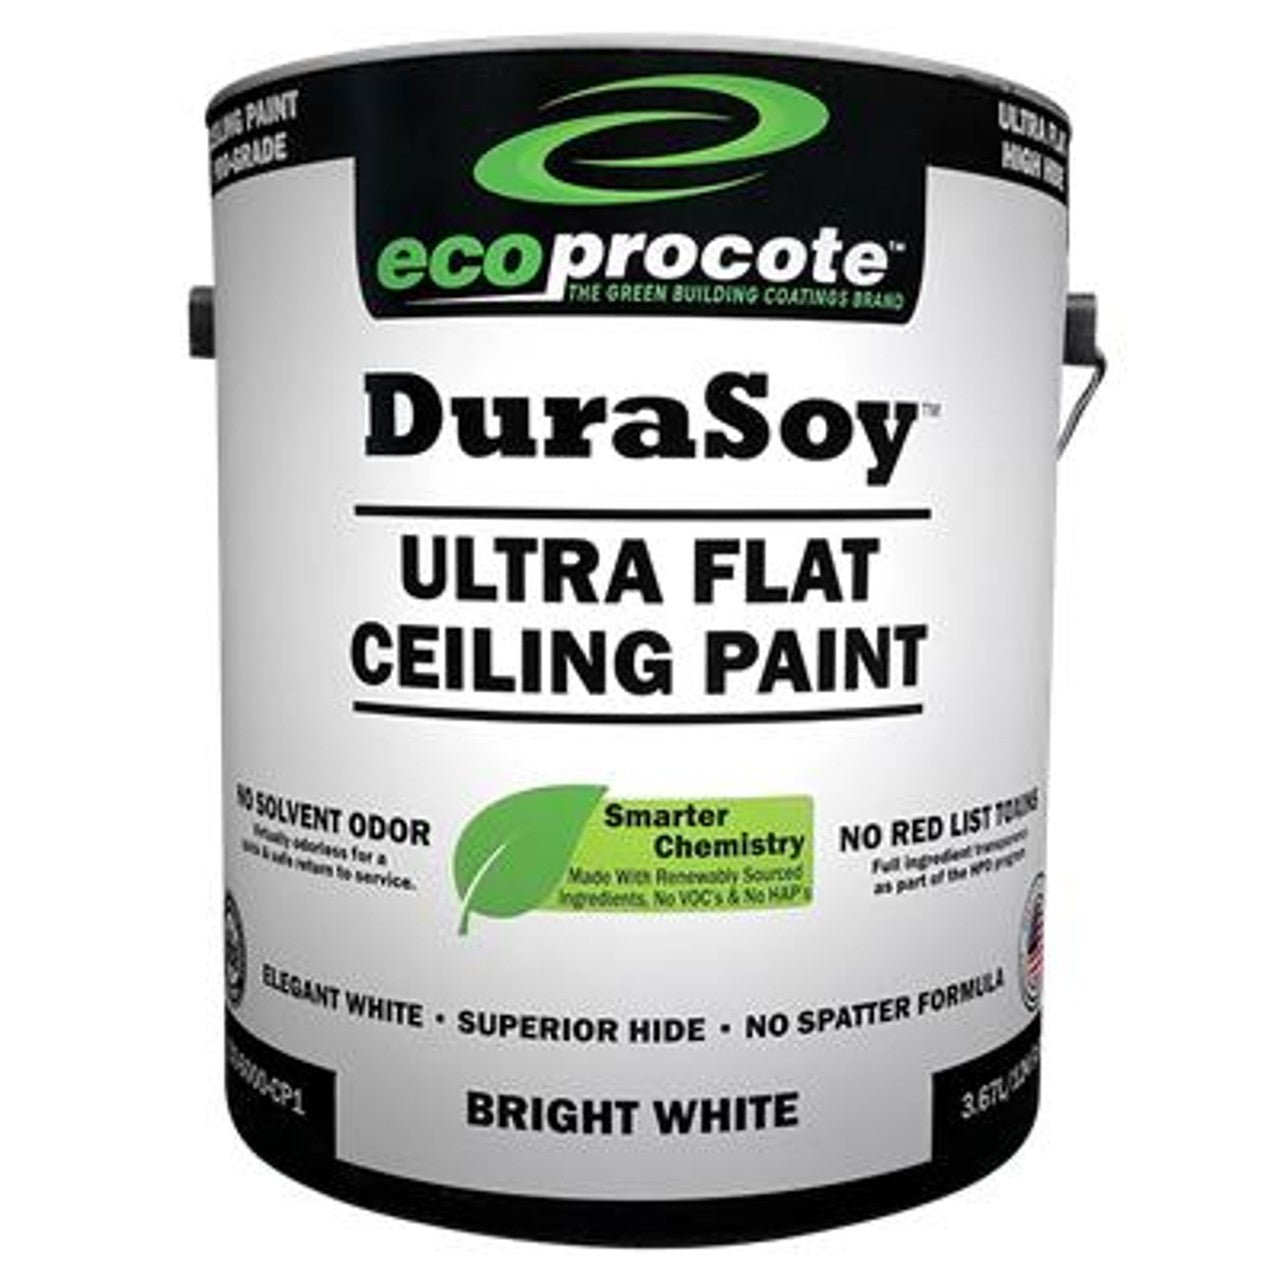 DuraSoy Ceiling Paint, Bright White, Flat